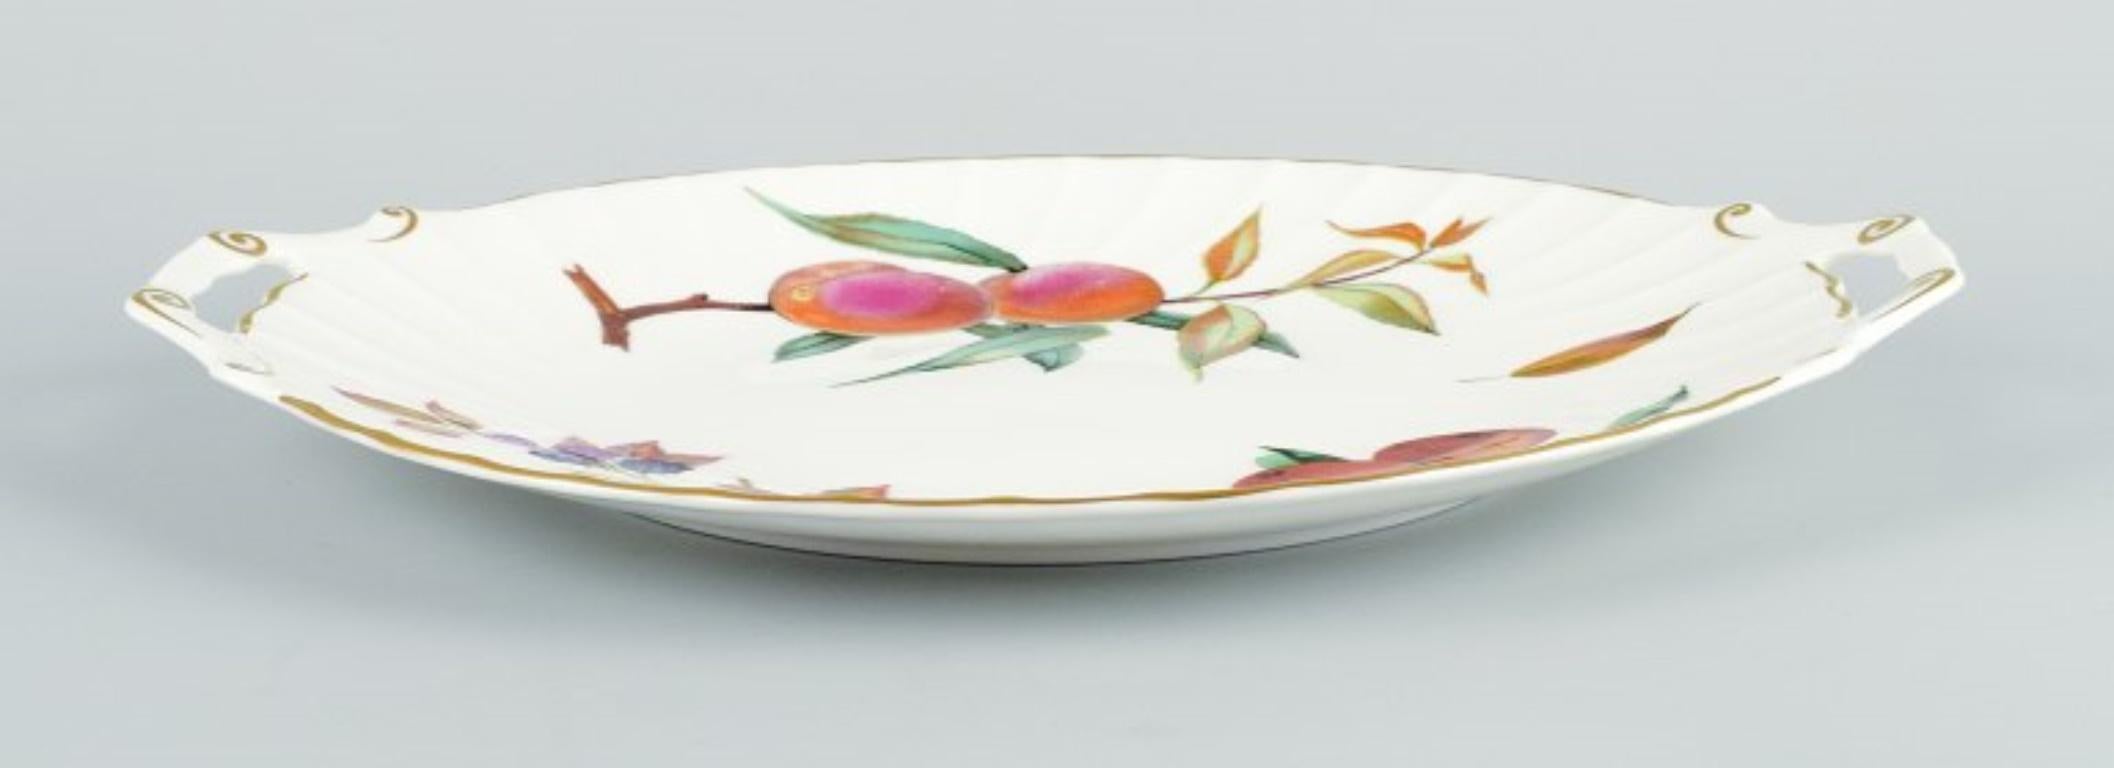 Hand-Painted Royal Worcester Fine Porcelain, Cake Plate with Motifs of Apples and Berries For Sale